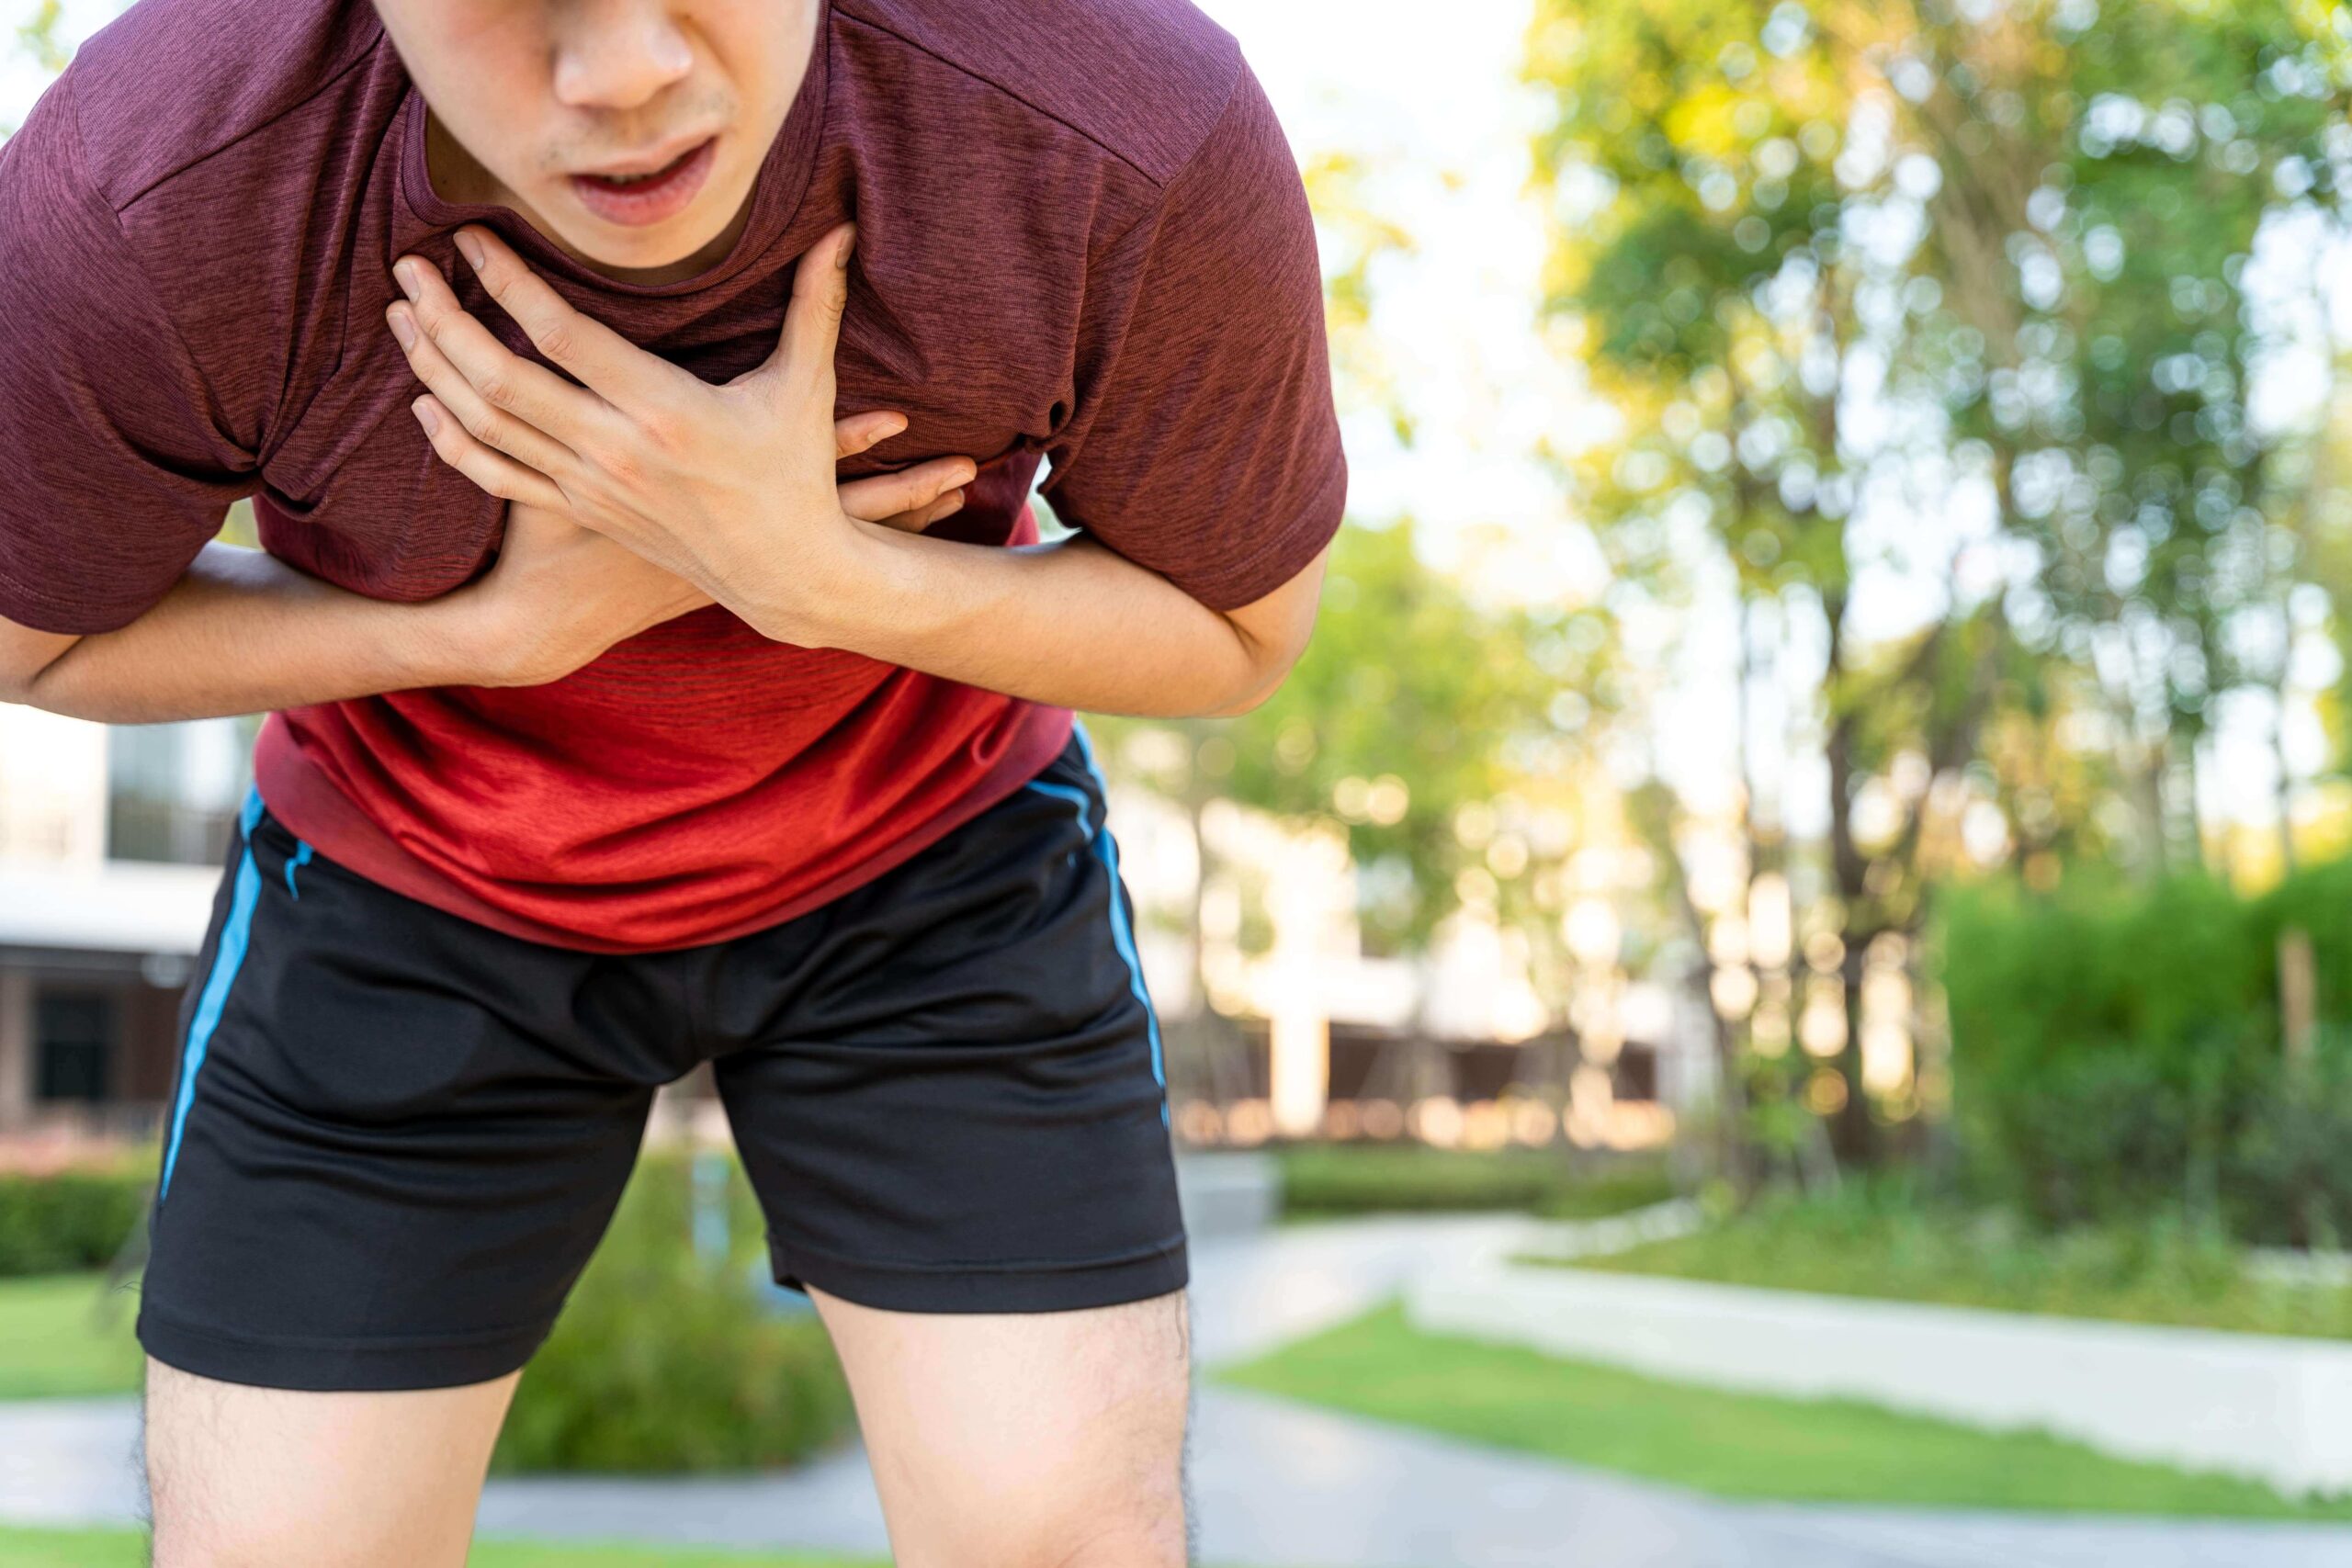 What Does Exercise Induced Asthma Feel Like?